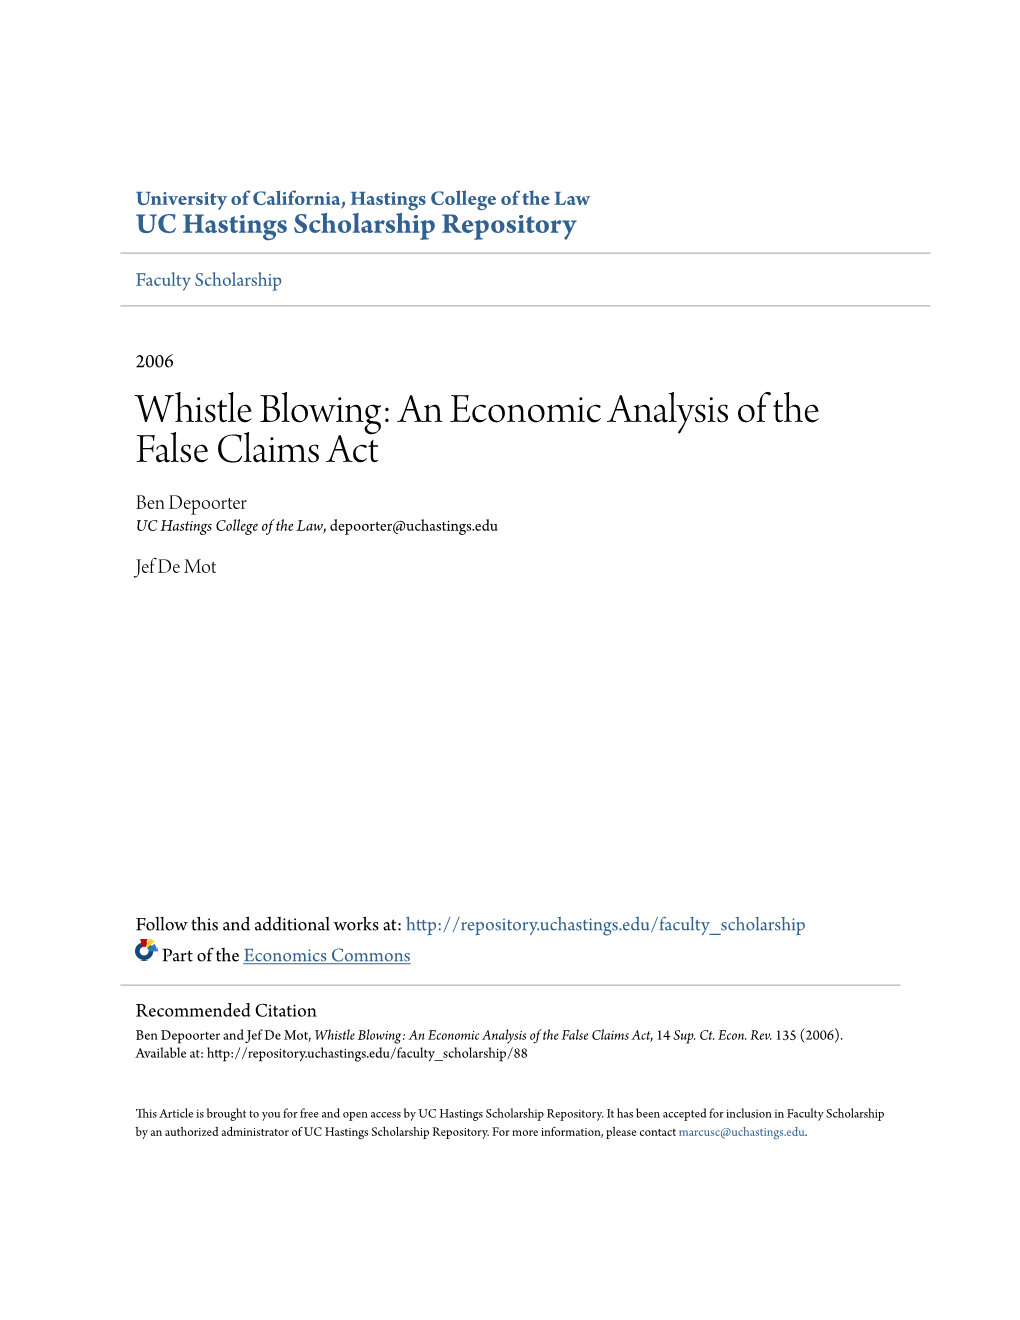 Whistle Blowing: an Economic Analysis of the False Claims Act Ben Depoorter UC Hastings College of the Law, Depoorter@Uchastings.Edu